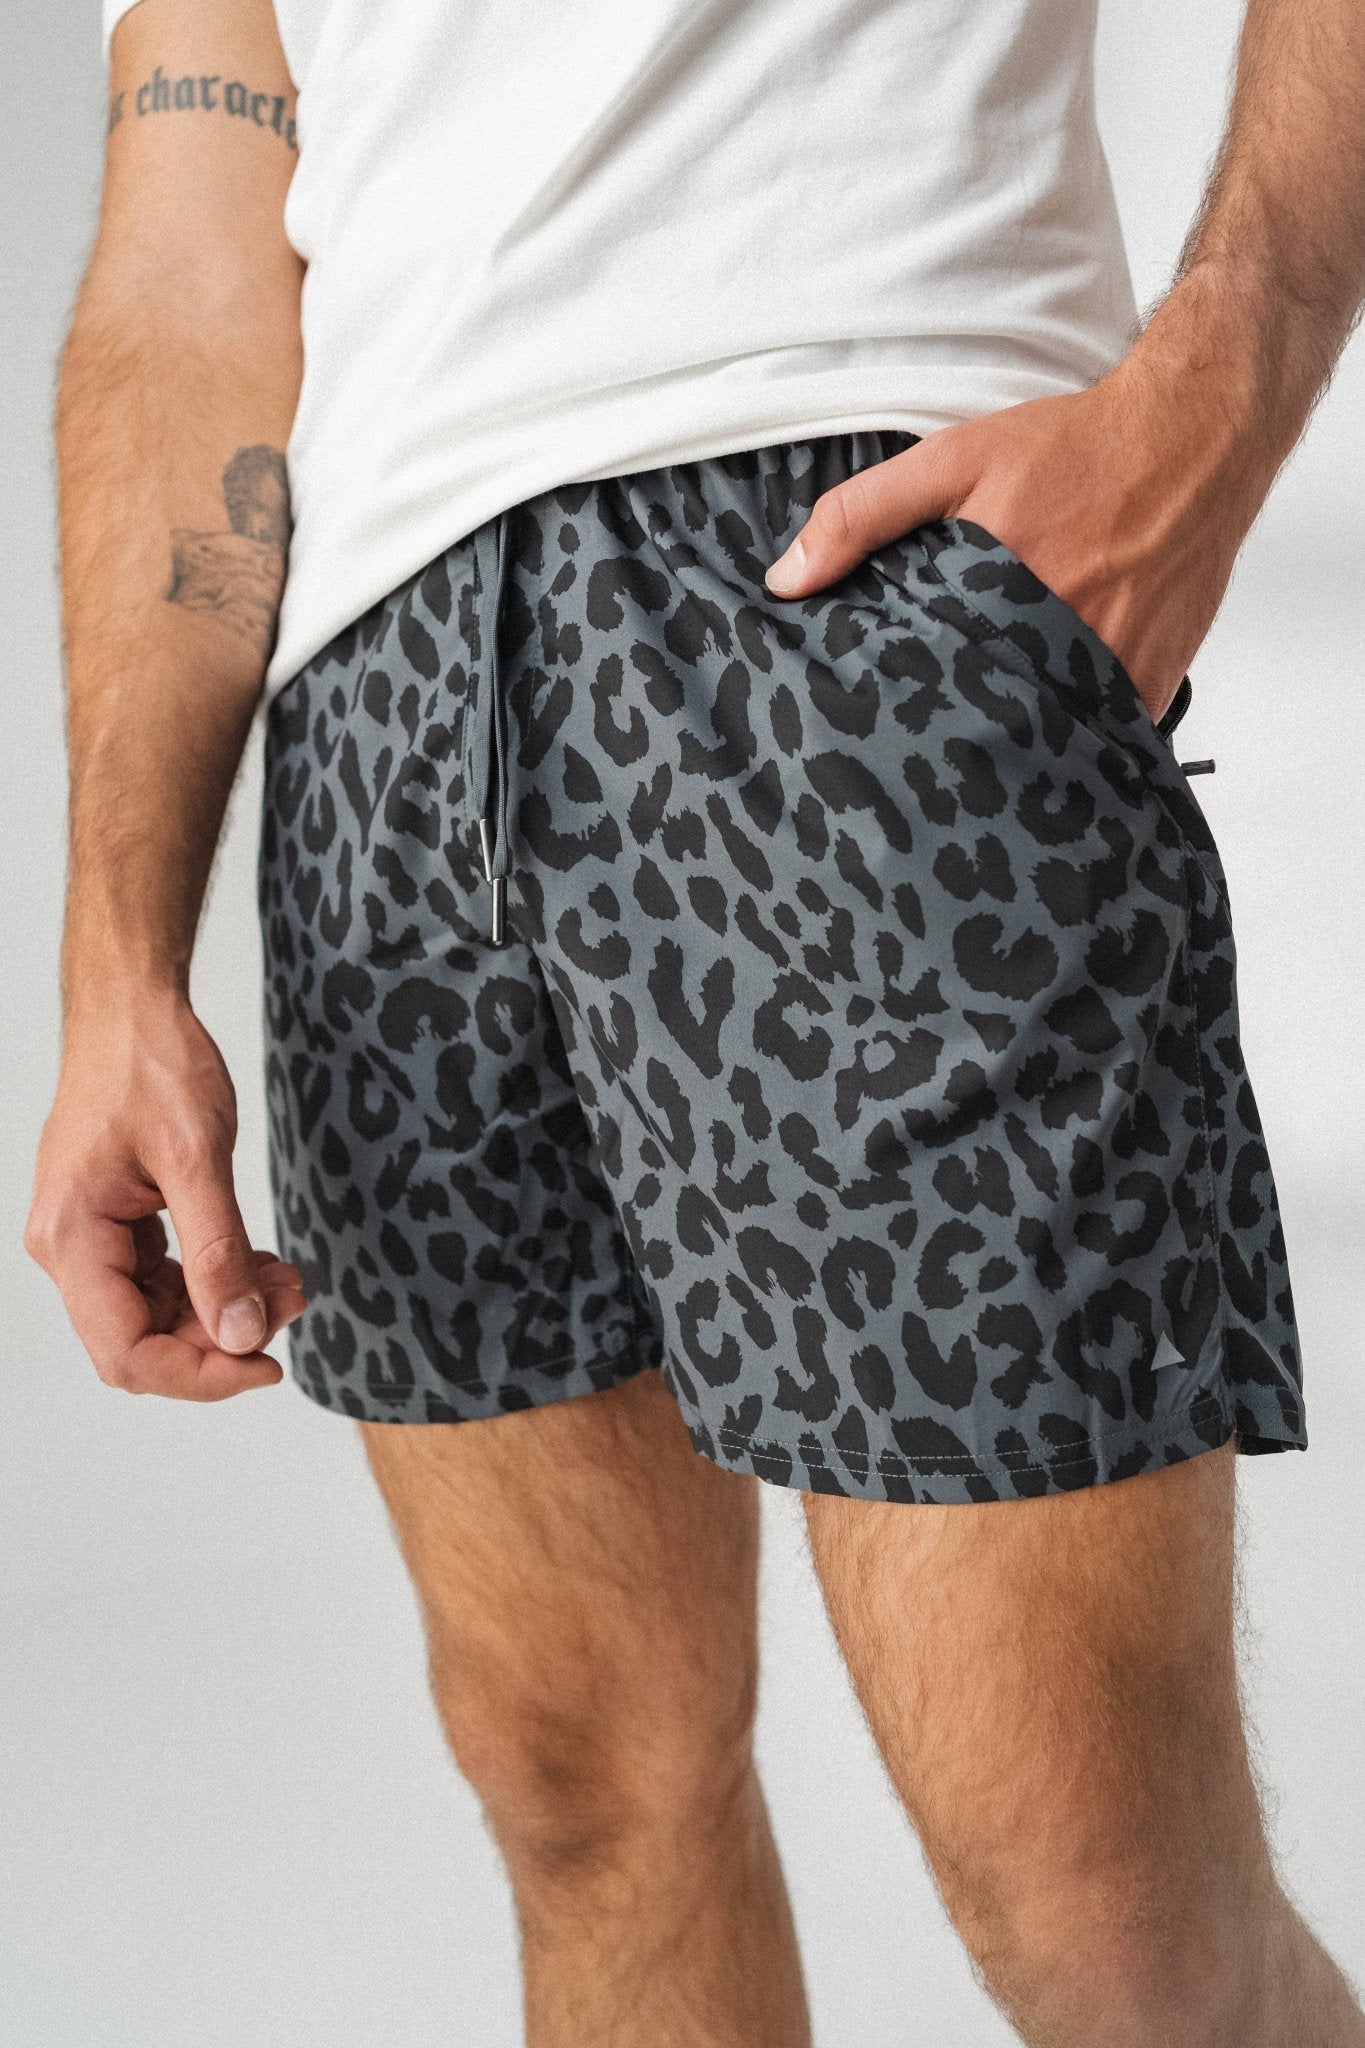 The Prime Short 6" - King Cheetah Midnight, Men's Bottoms from Vitality Athletic and Athleisure Wear